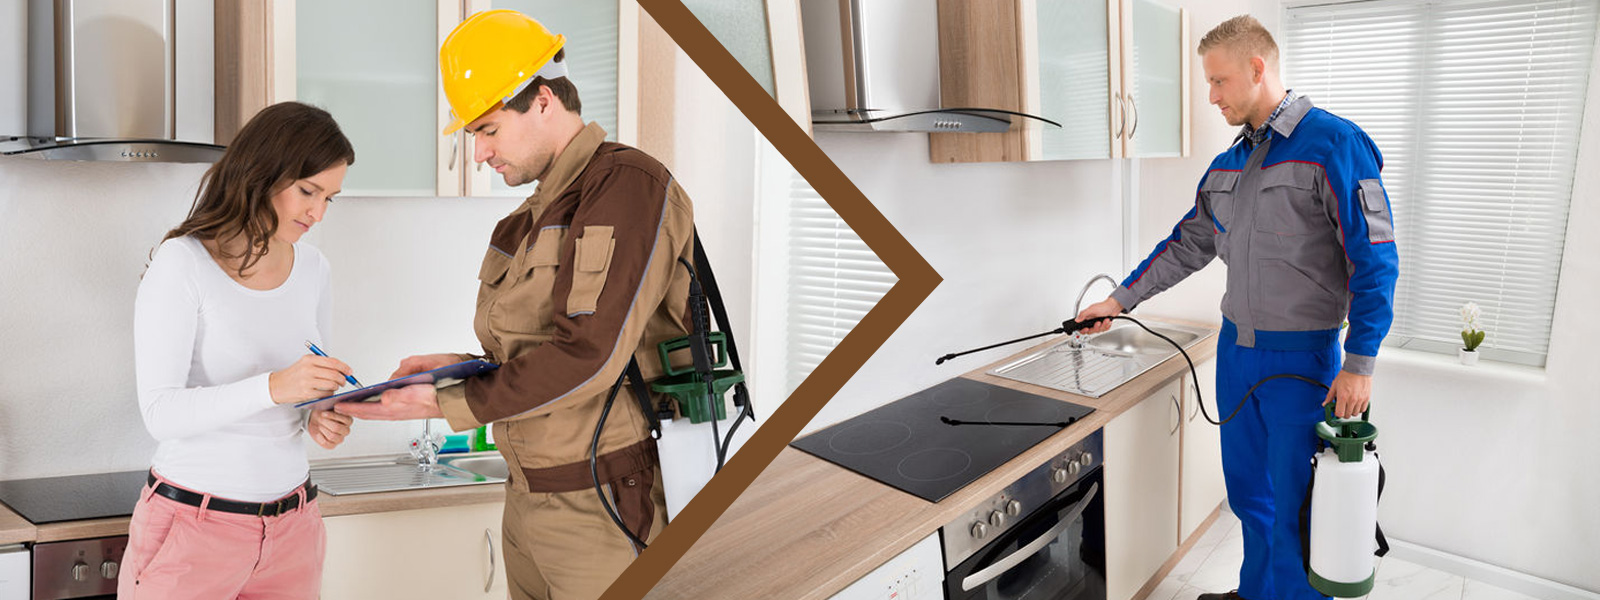 Top 5 Things You Need To Know Before Hiring A Pest Control Company